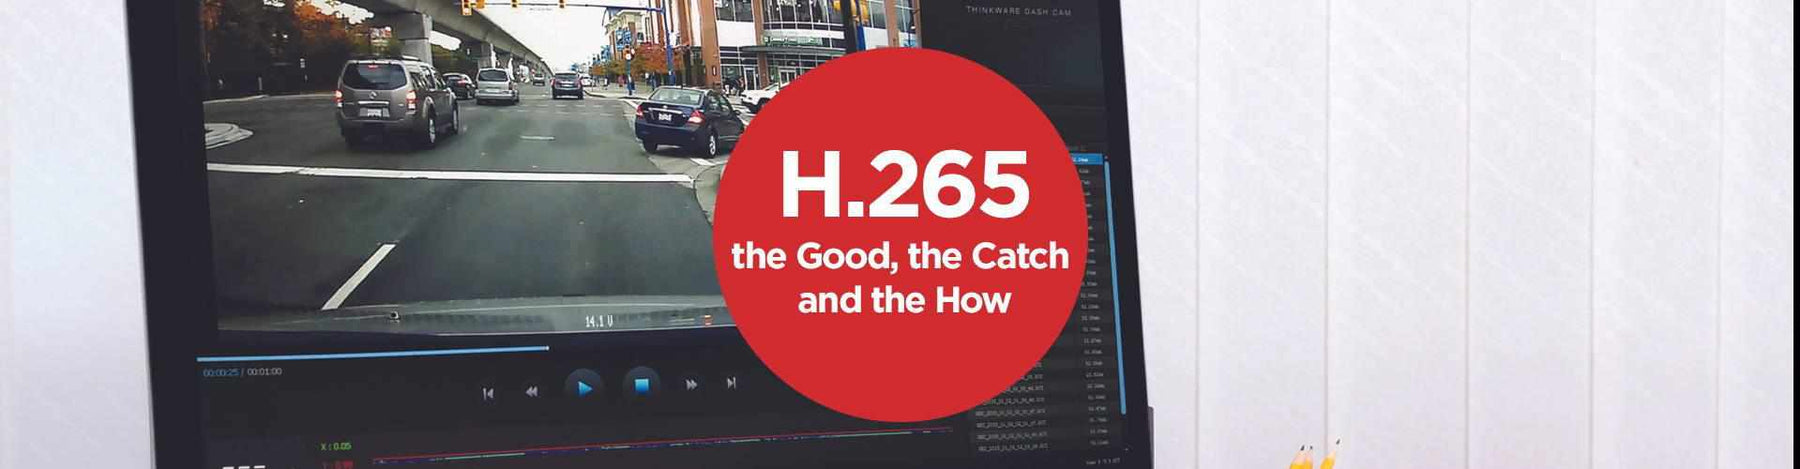 H.265: the Good, the Catch and the How -  - BlackboxMyCar Canada